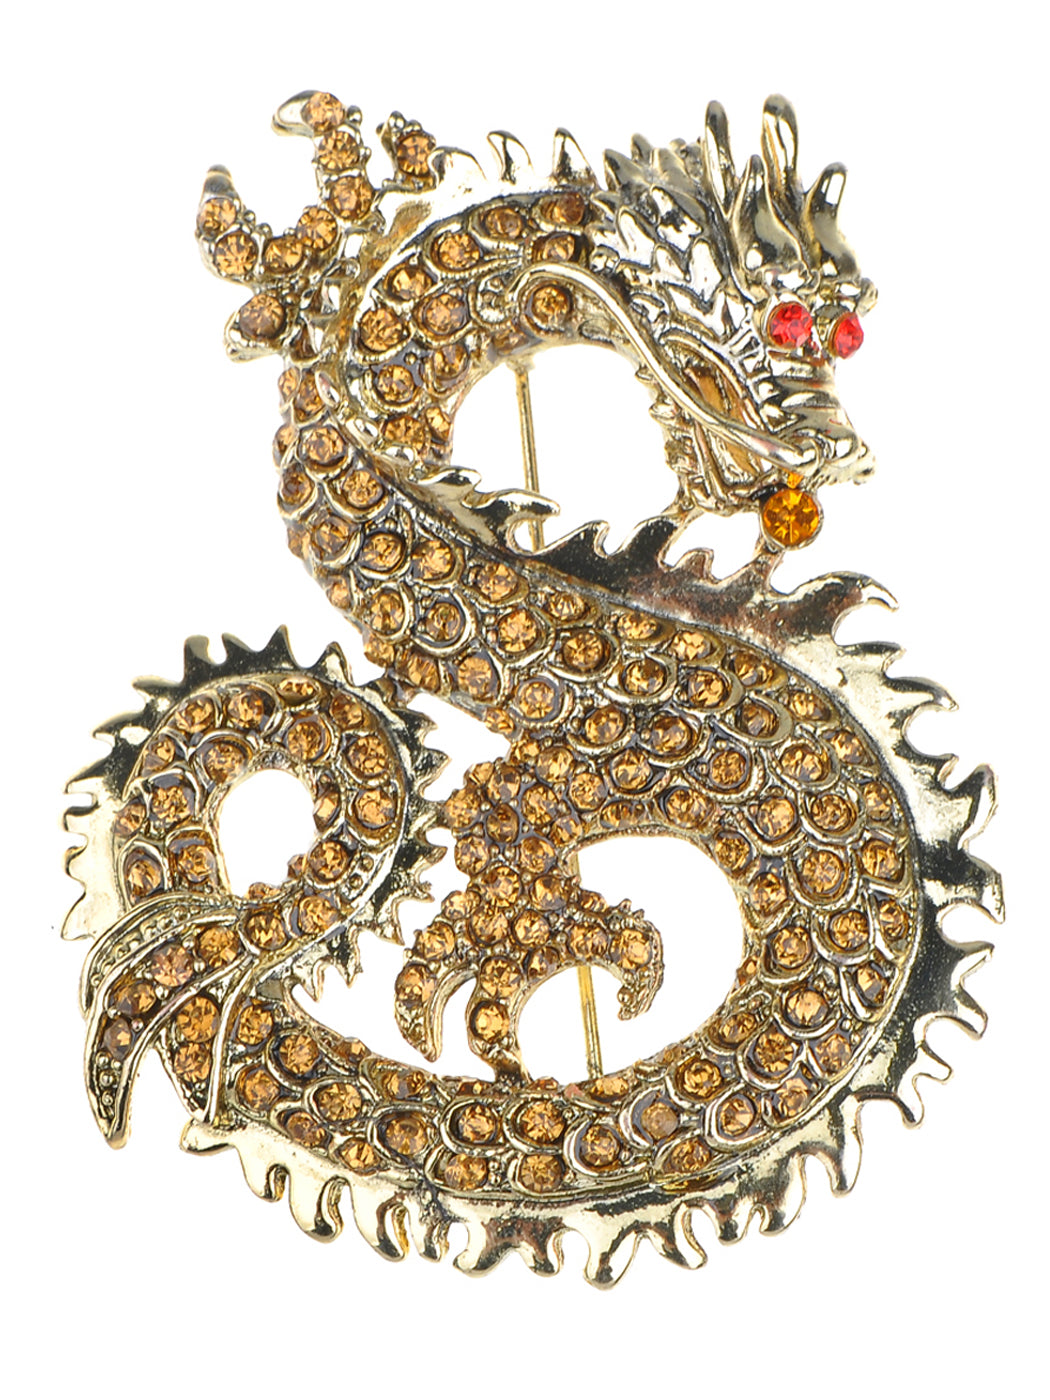 Mythical Ancient Asian Chinese New Year Zodiac Dragon Novelty Celebration Party Brooch Pin